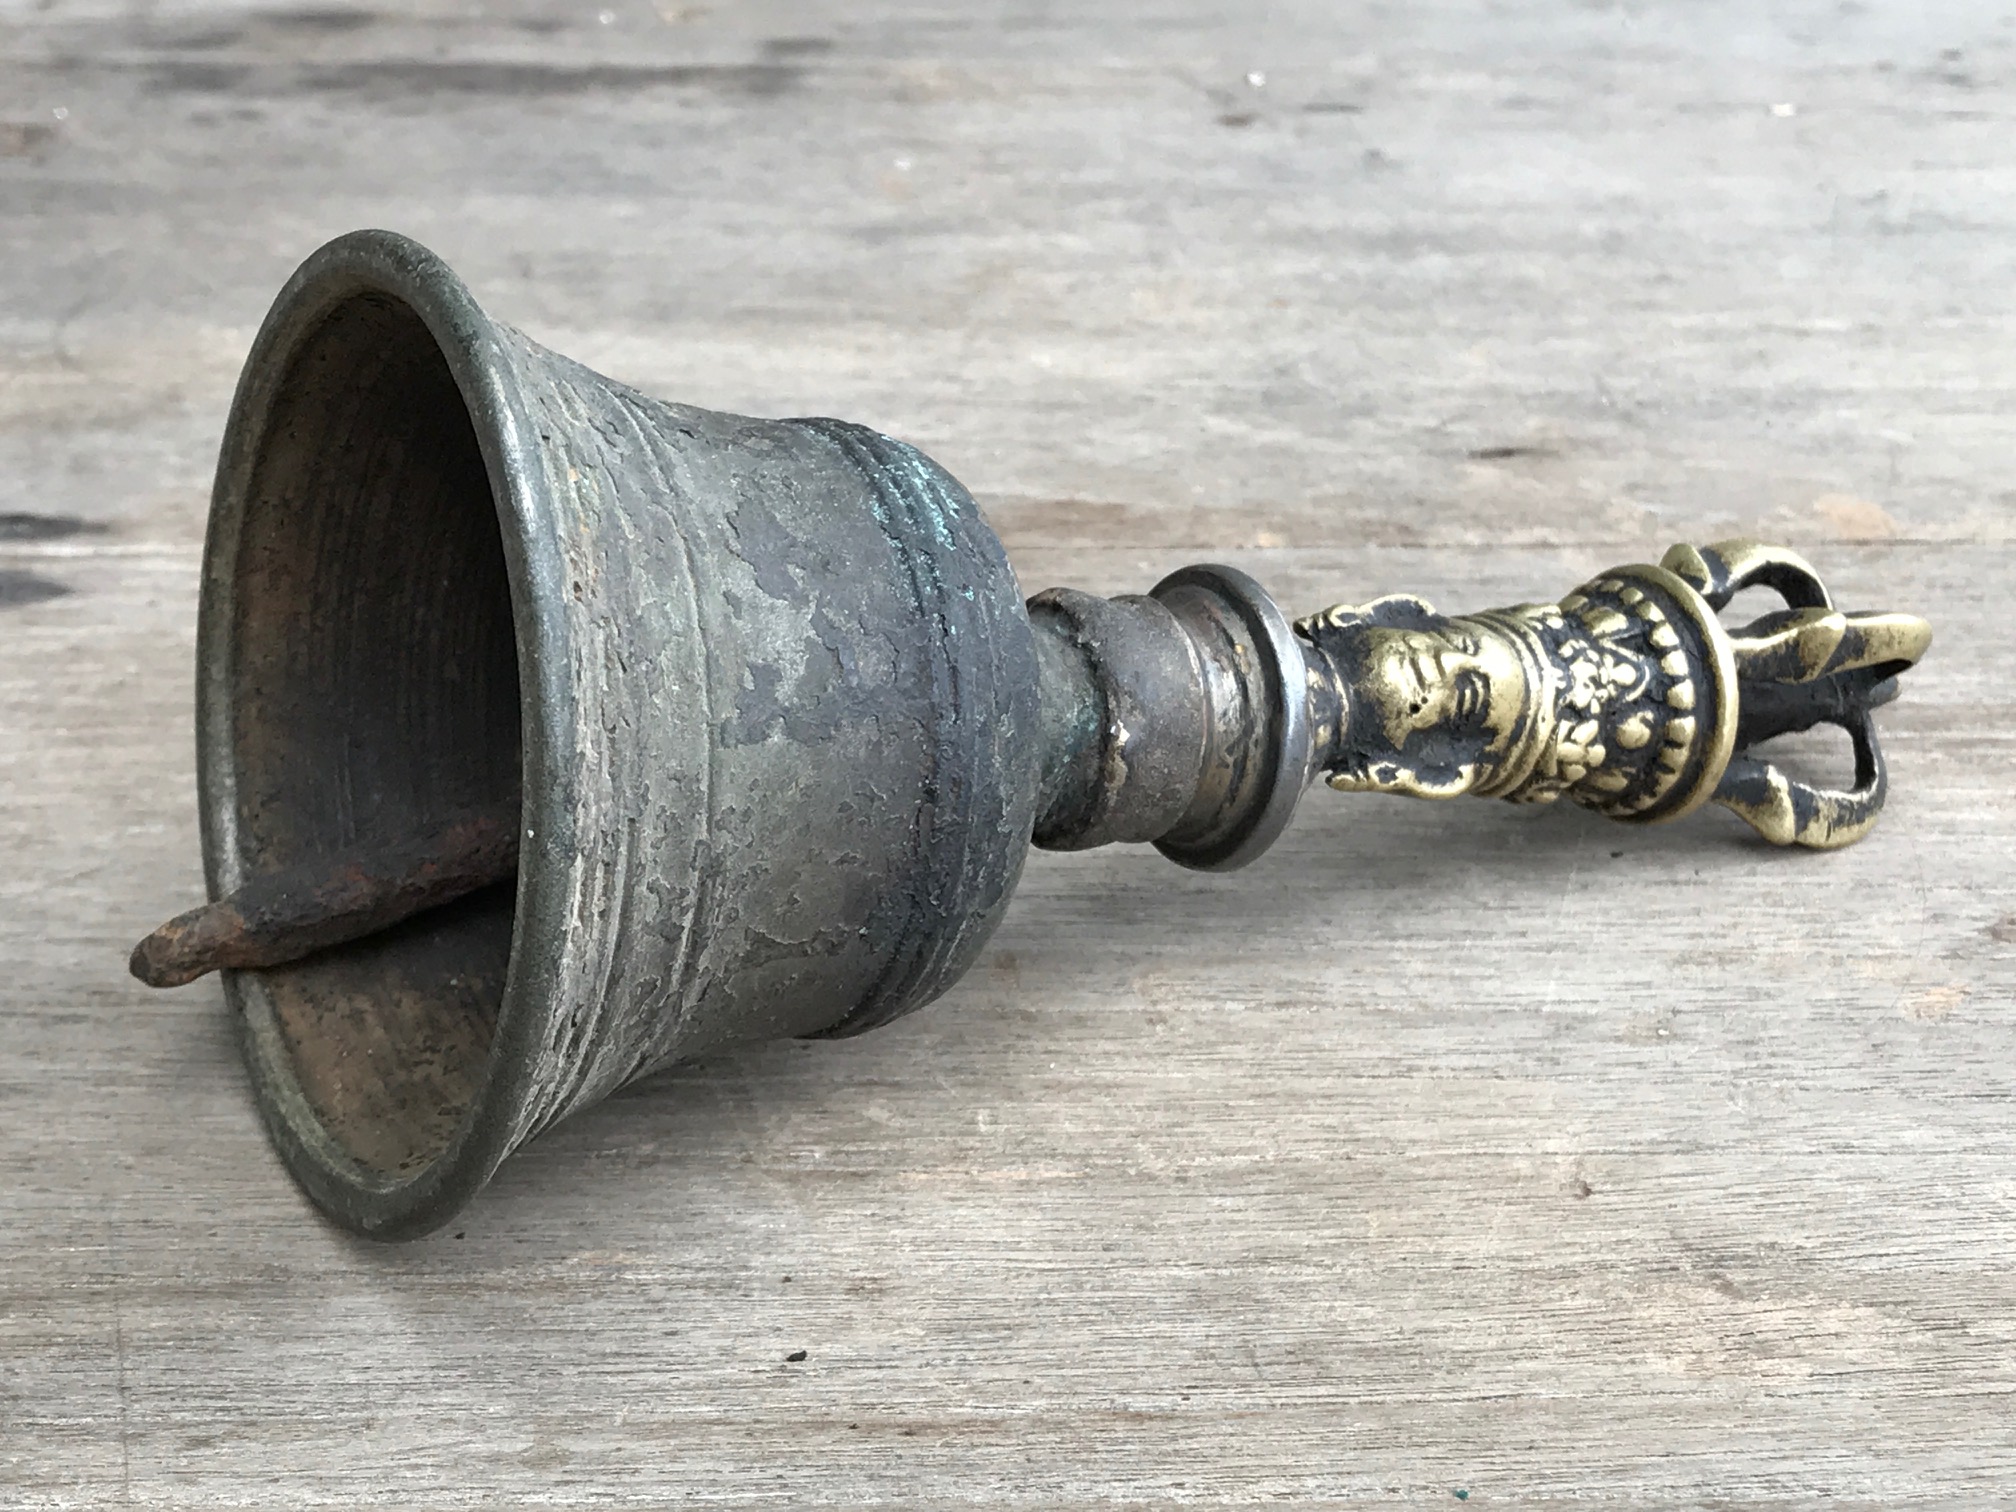 detail clapper view - Musical Instrument, temple bell , Nepal, 150 years old, bronze, 7 1/4" x 3 1/4", $1300. thedavidalancollection.com , solana beach, ca